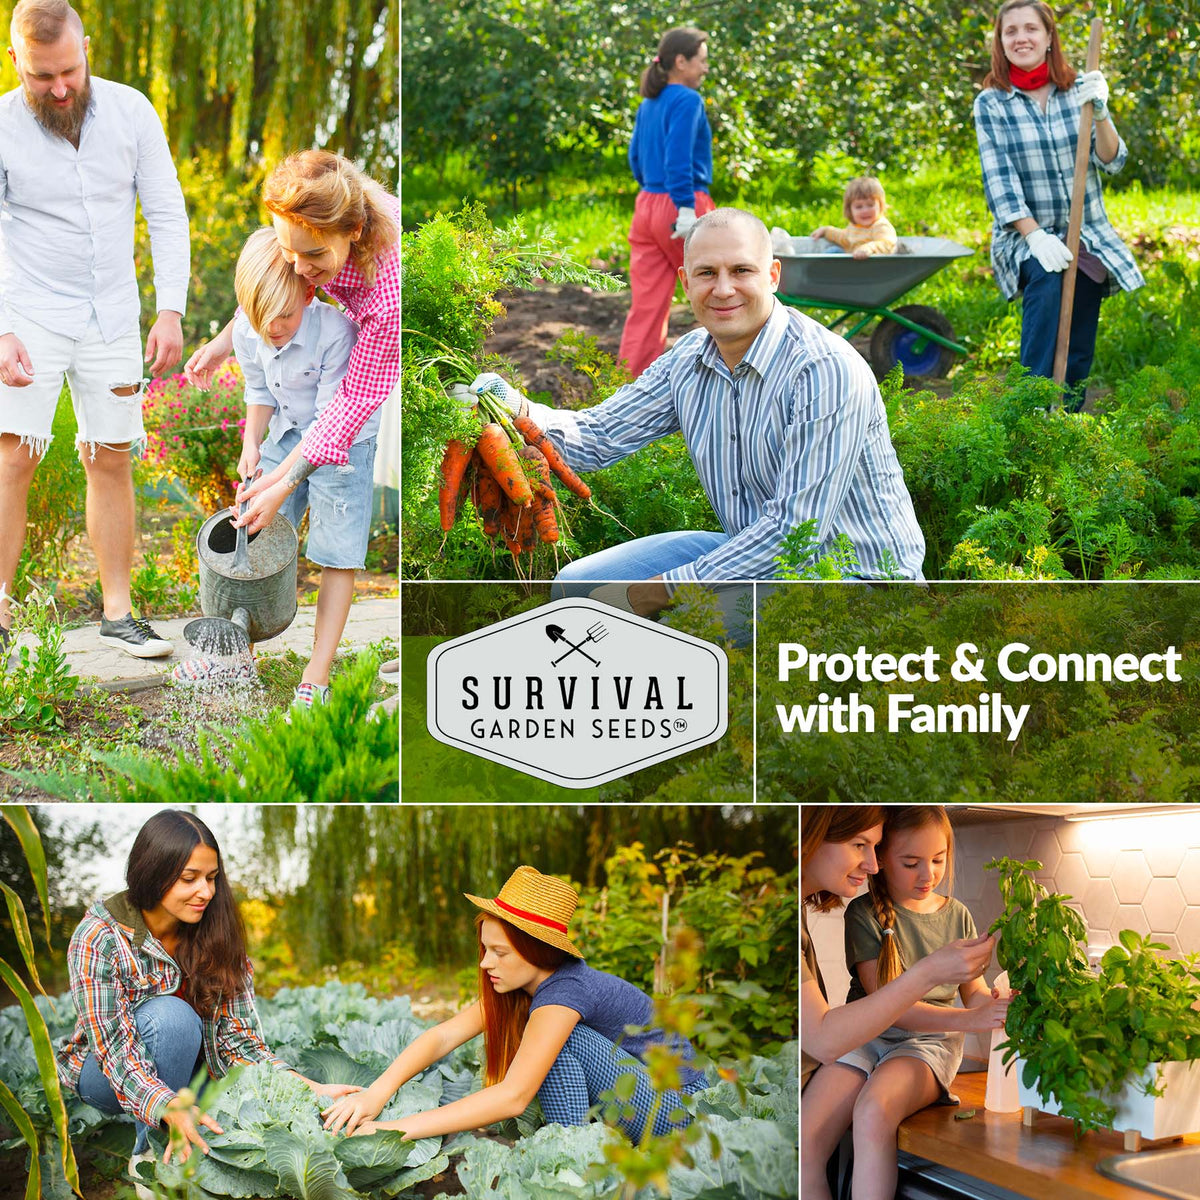 Protect and Connect with Family in the garden